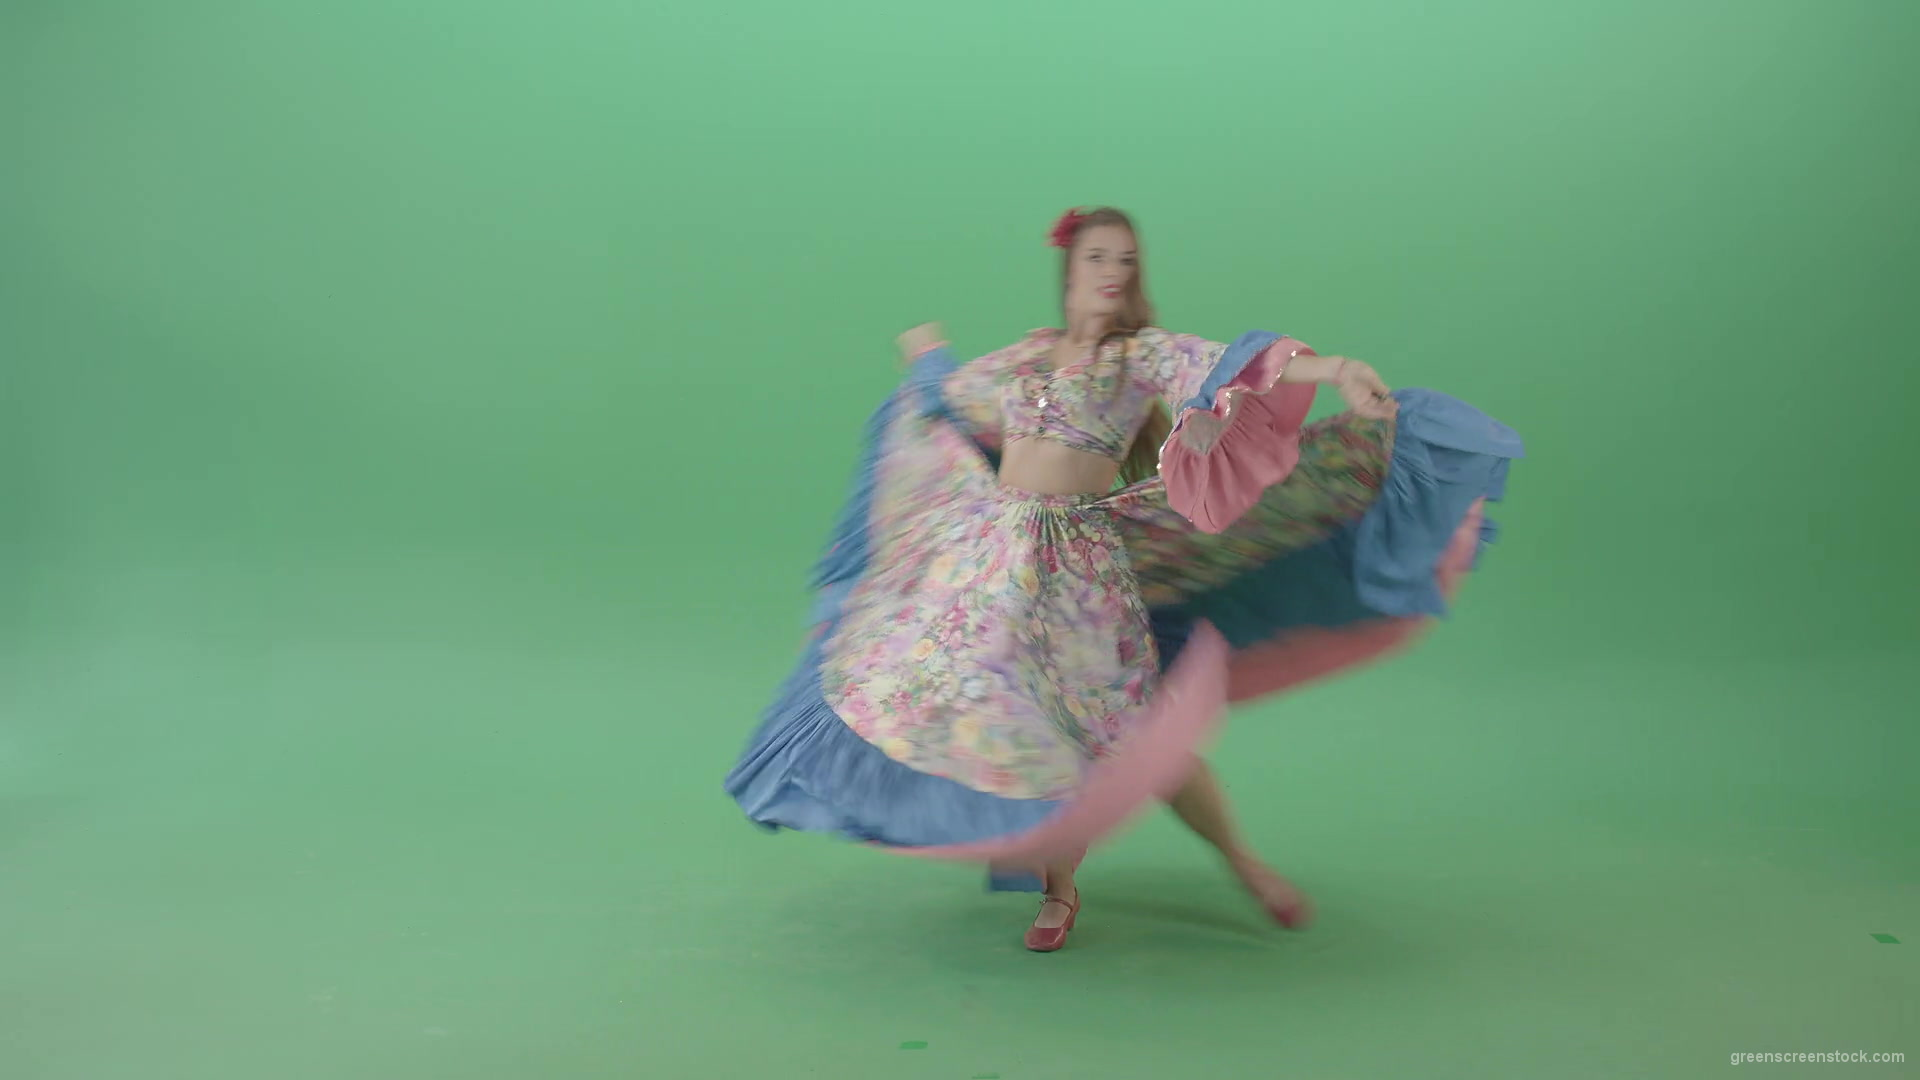 Elegant-movement-by-Gypsy-girl-in-moldova-costume-isolated-on-green-screen-4K-Video-Footage-clip-1920_004 Green Screen Stock